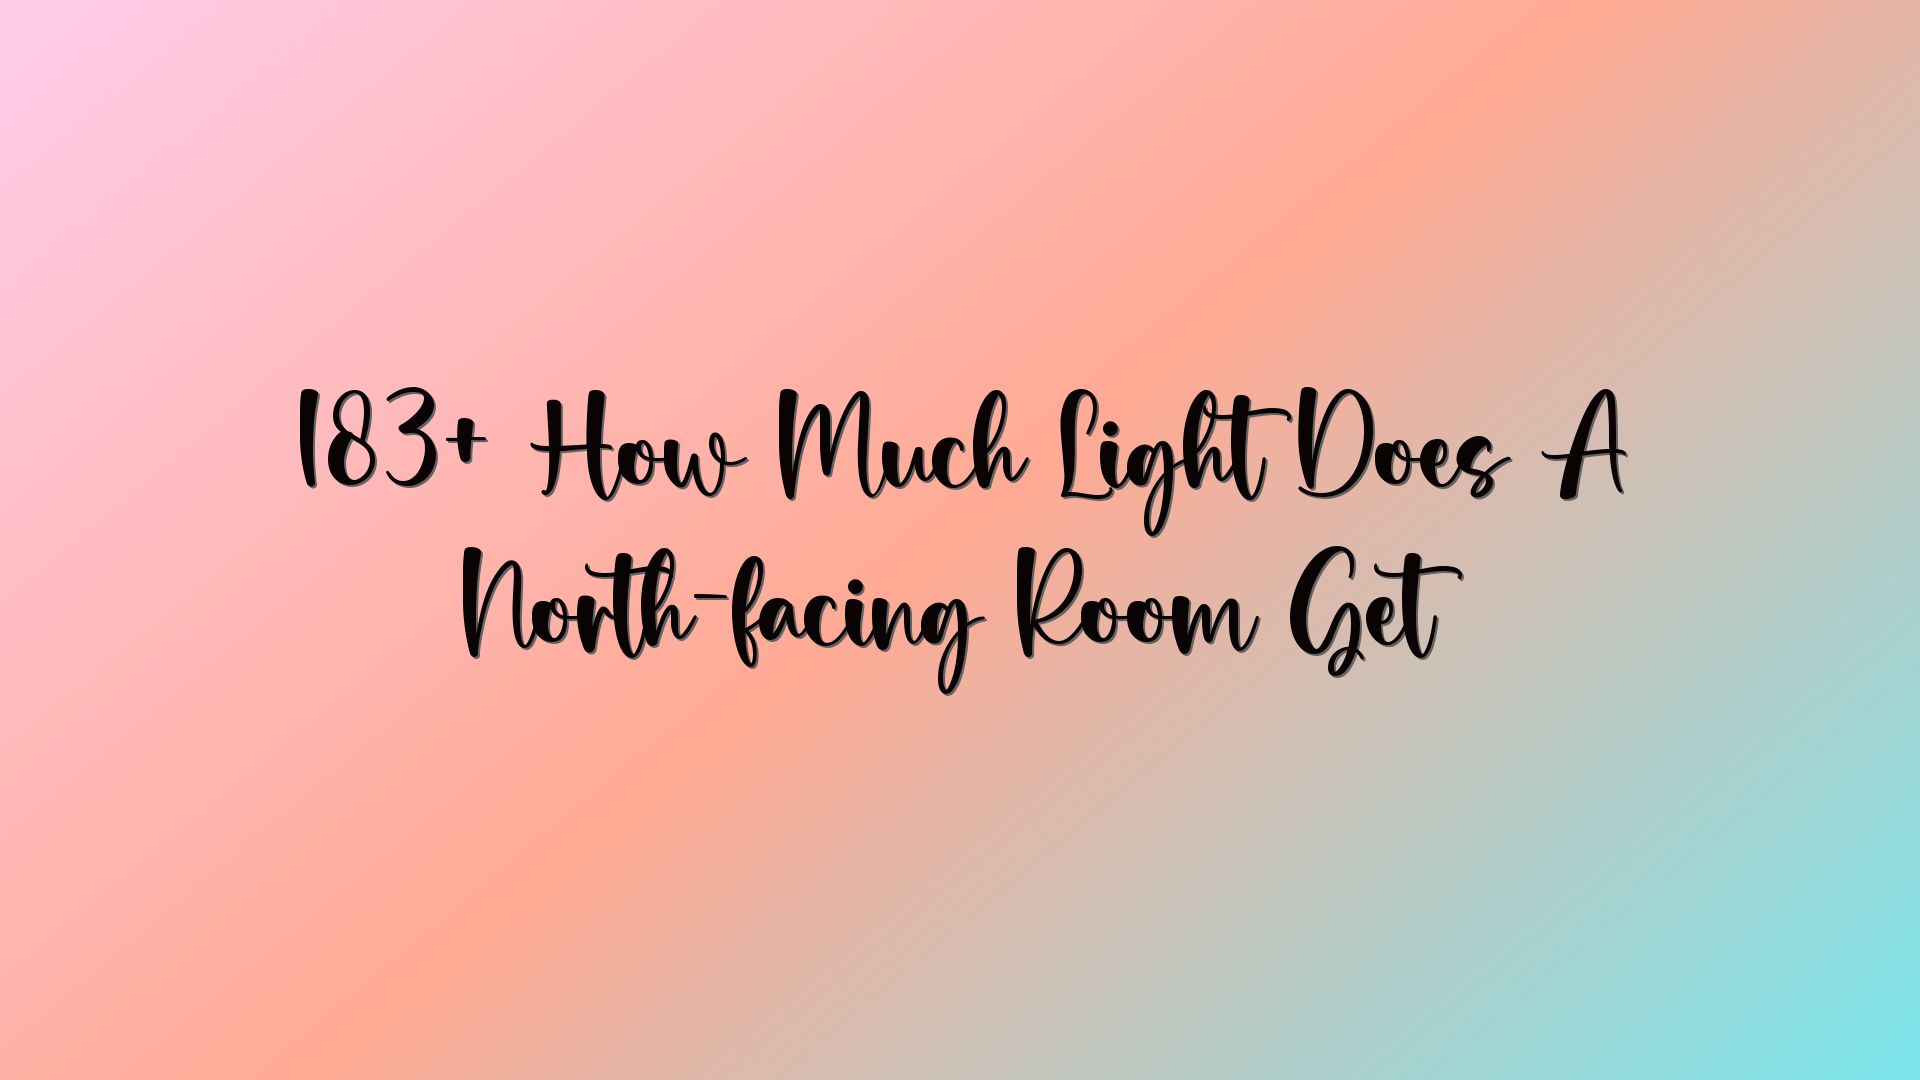 183+ How Much Light Does A North-facing Room Get